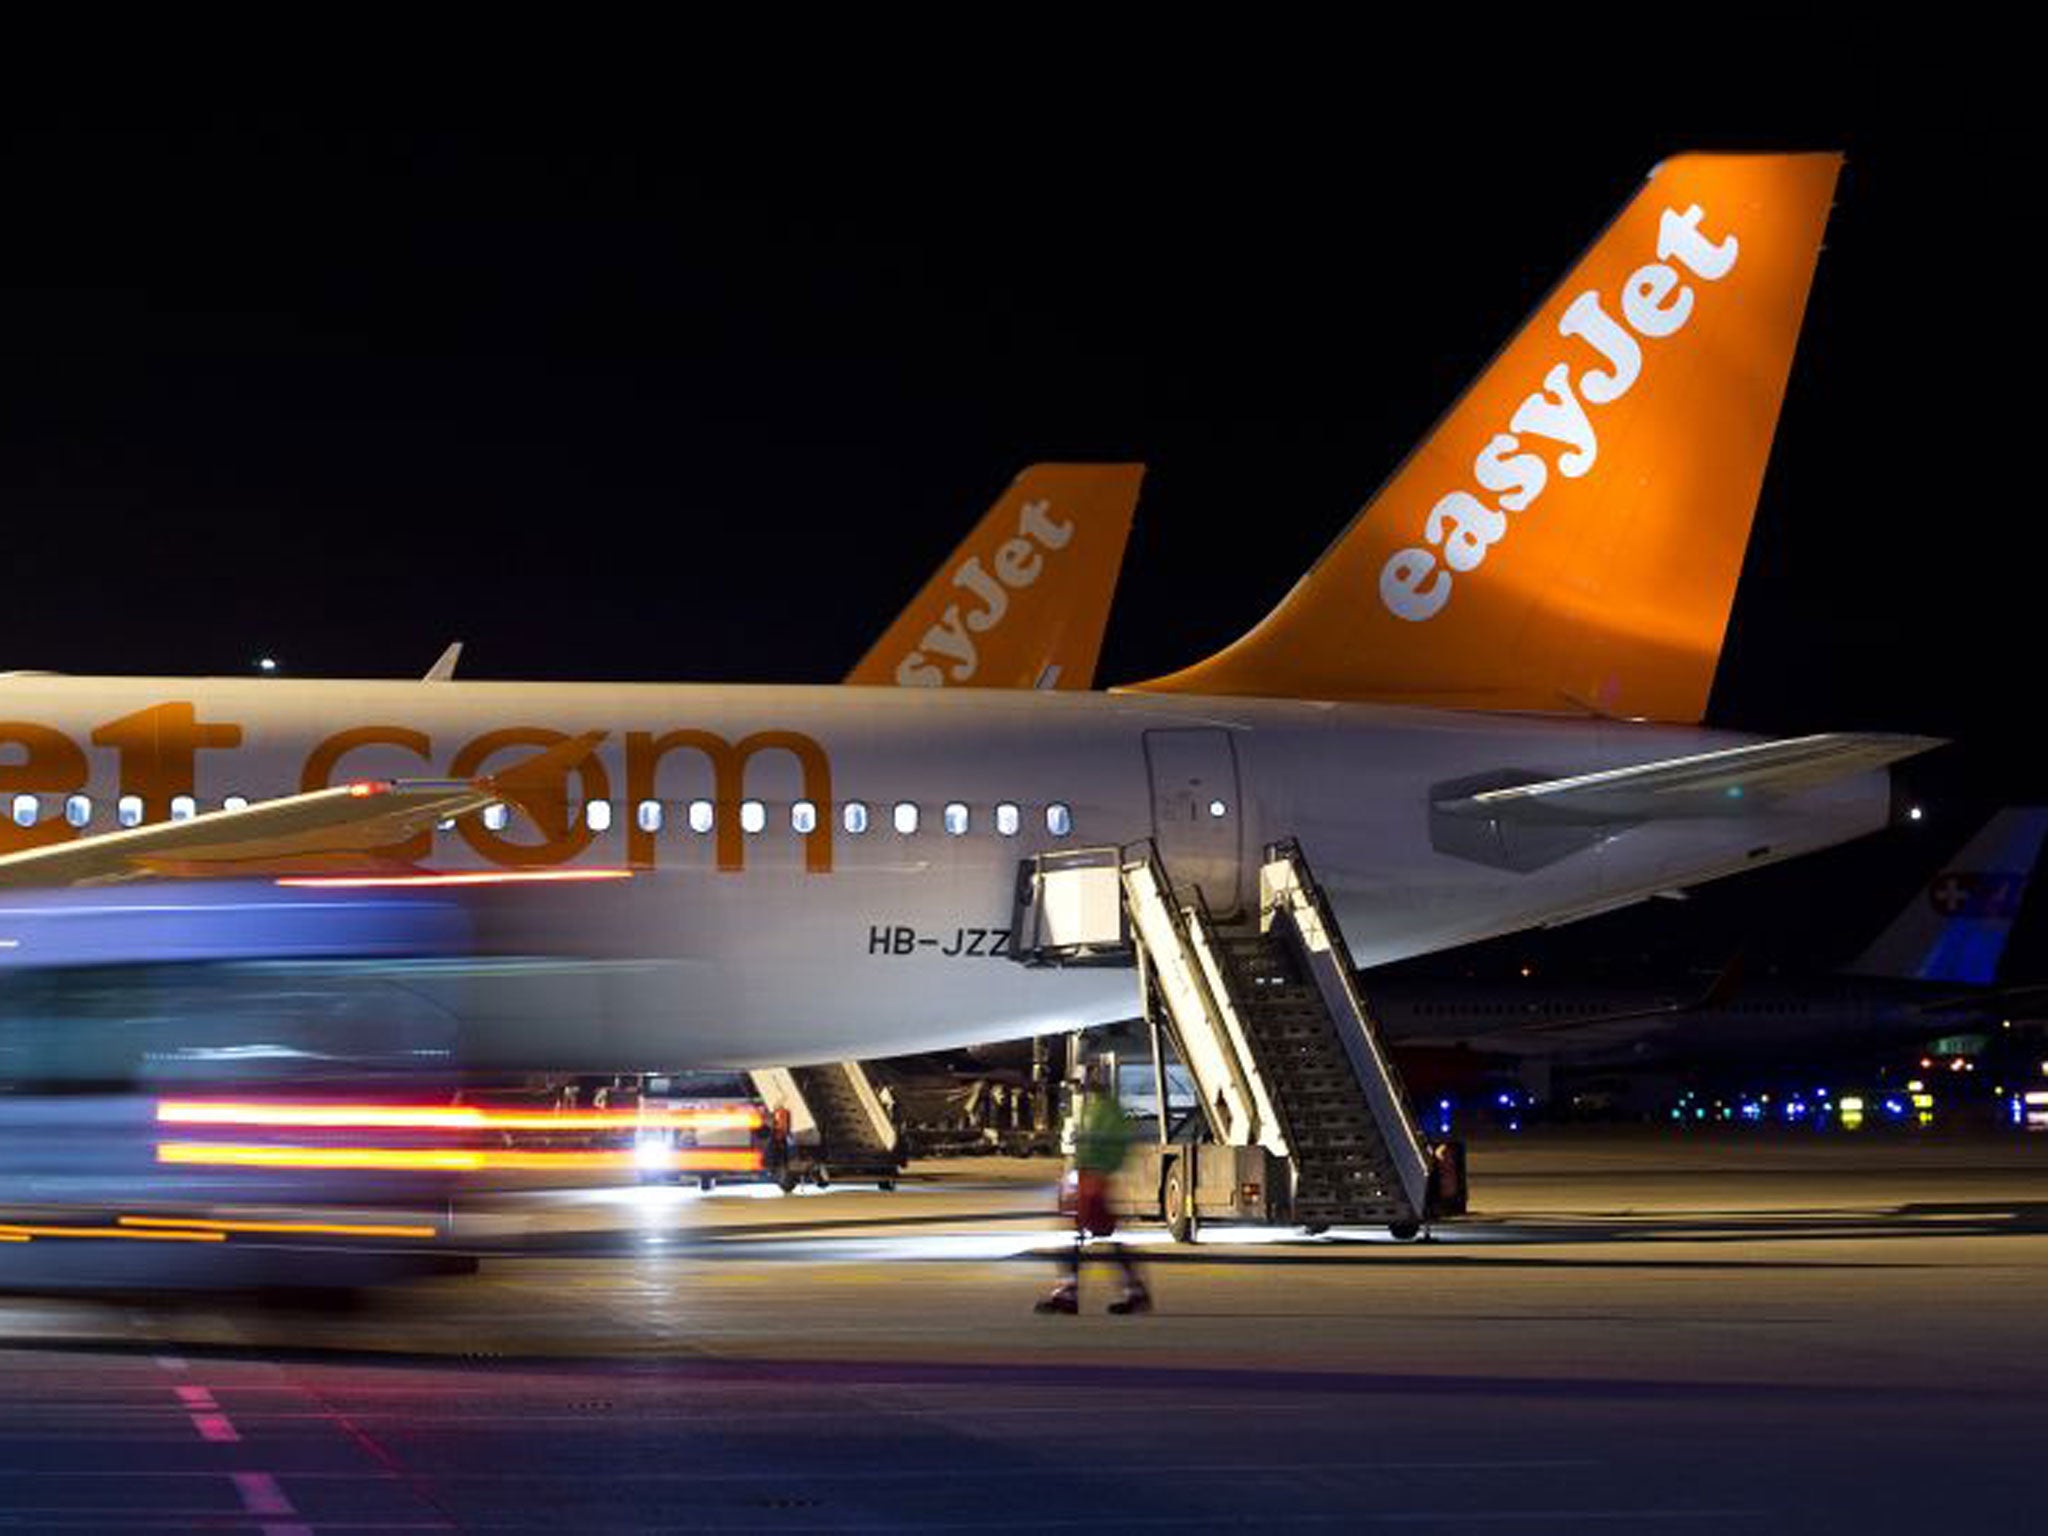 An Easyjet flight on route from Hamburg to Luton with 151 passengers on board has been diverted to Stansted Airport following a security alert.